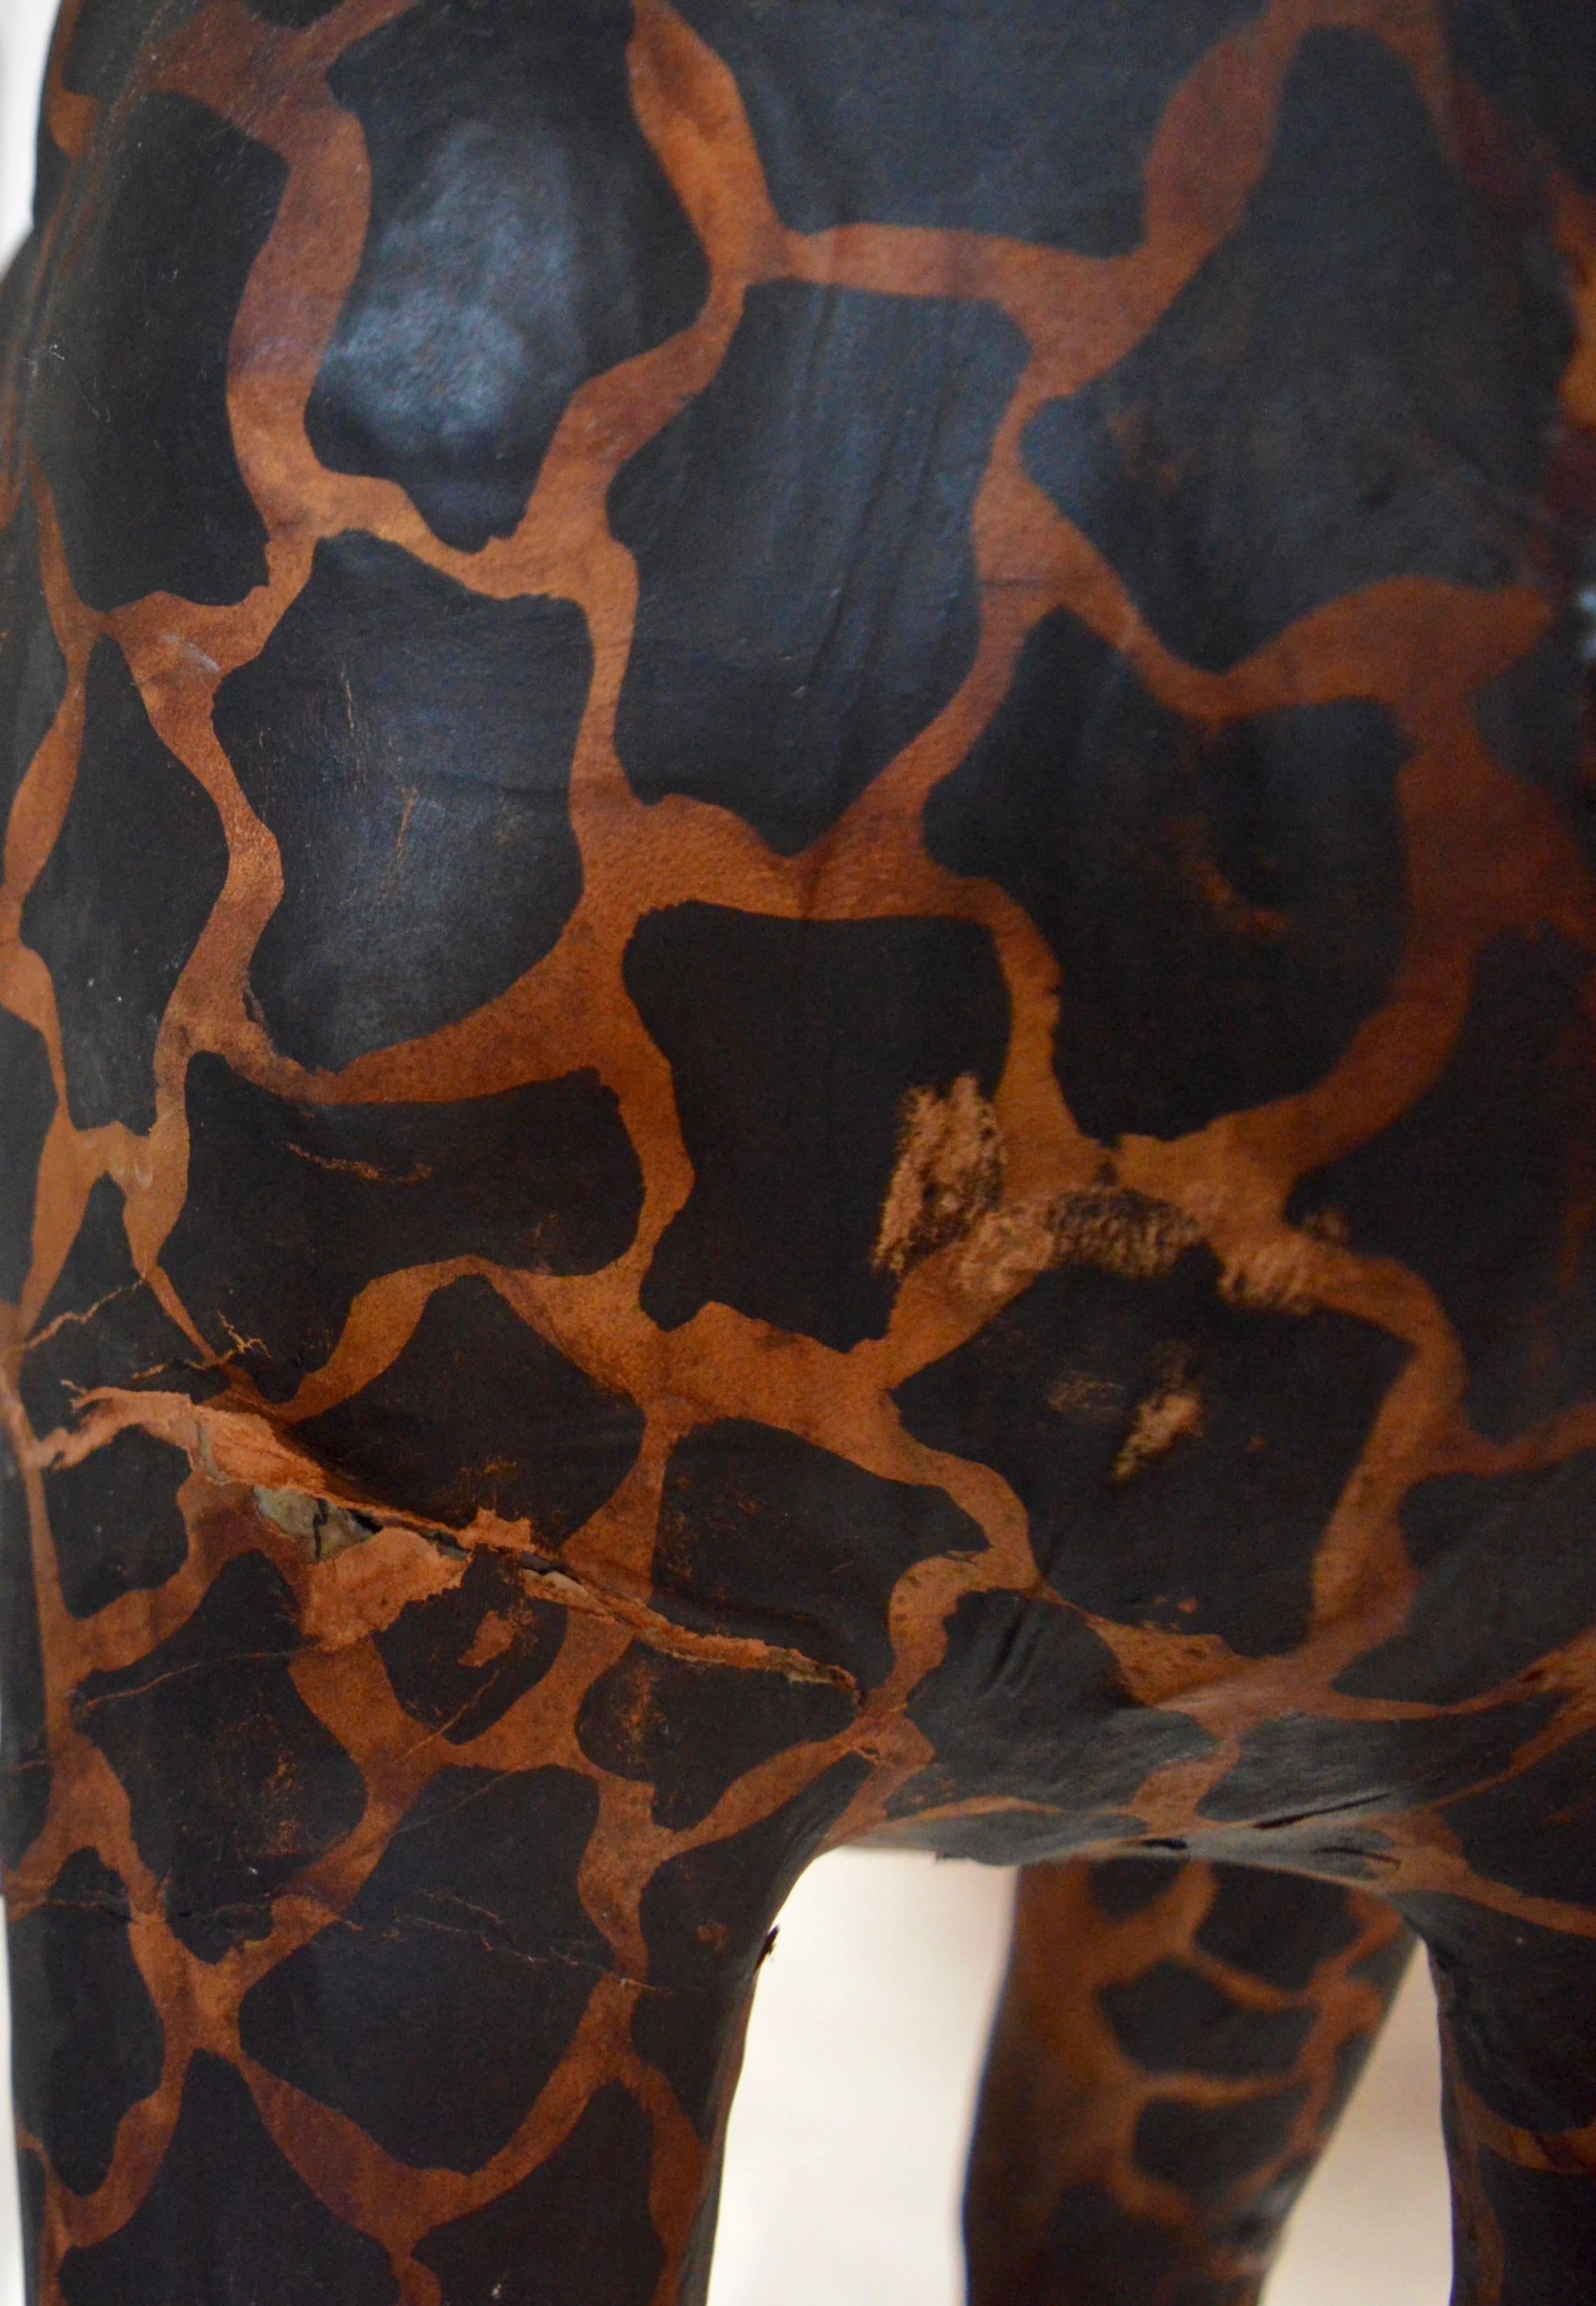 American Pair of Large Leather Giraffe Sculptures